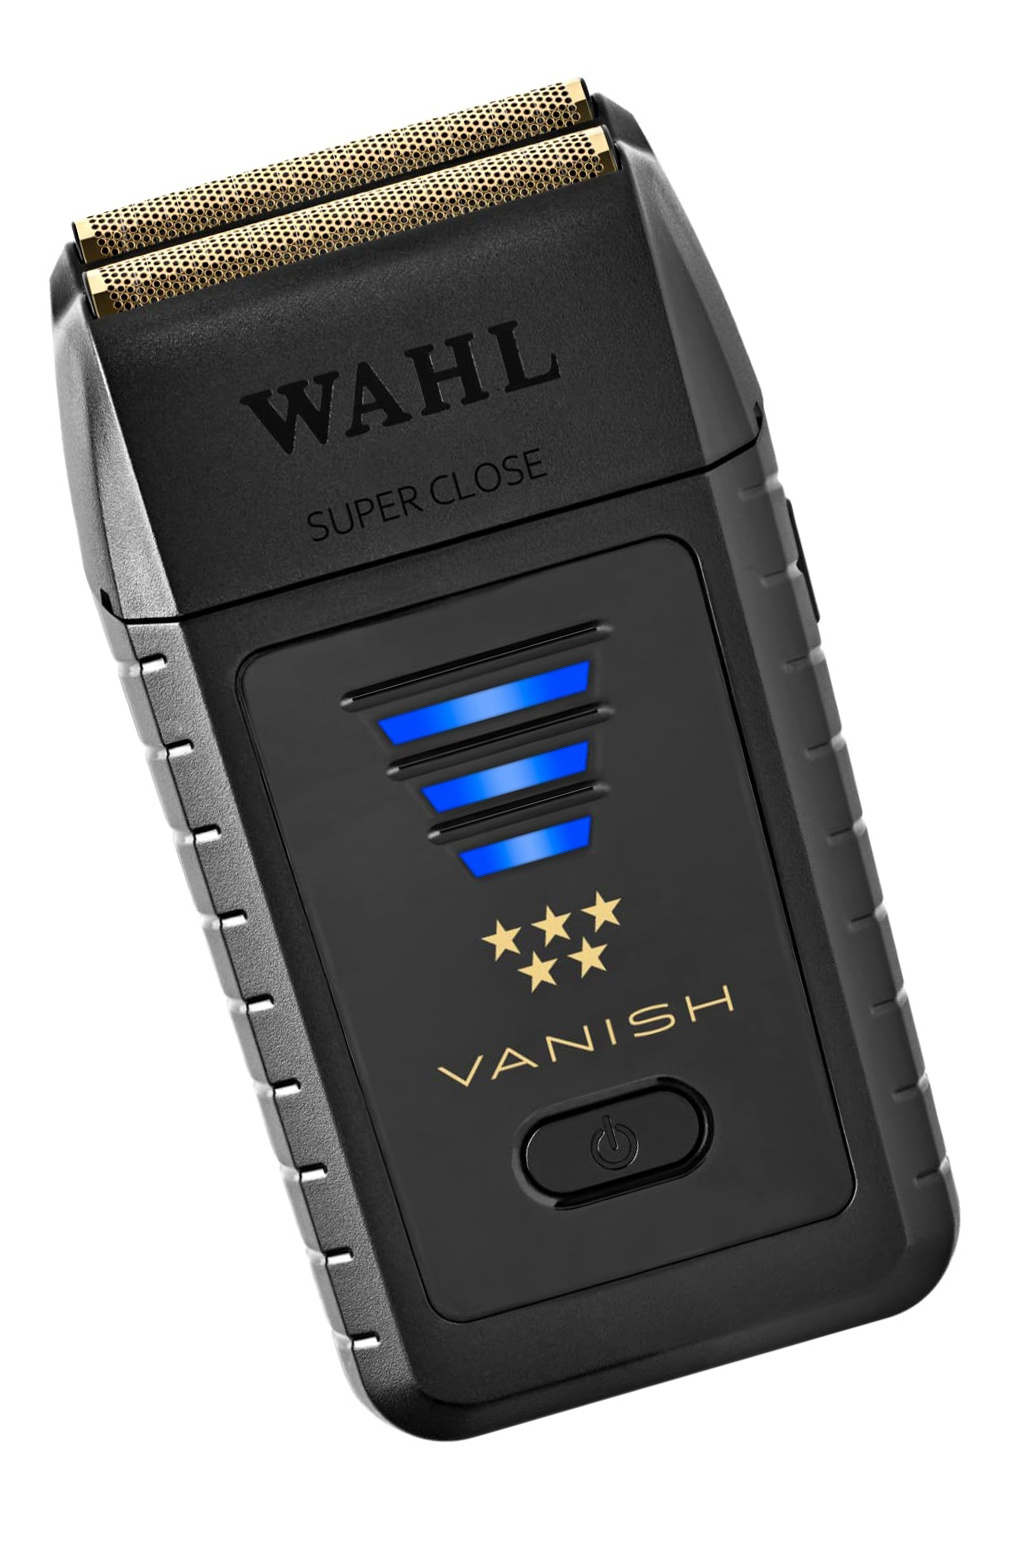 WAHL VANISH SHAVER at WAHL.HOP! - Tondeuse Shop for professional WAHL  clippers and trimmers